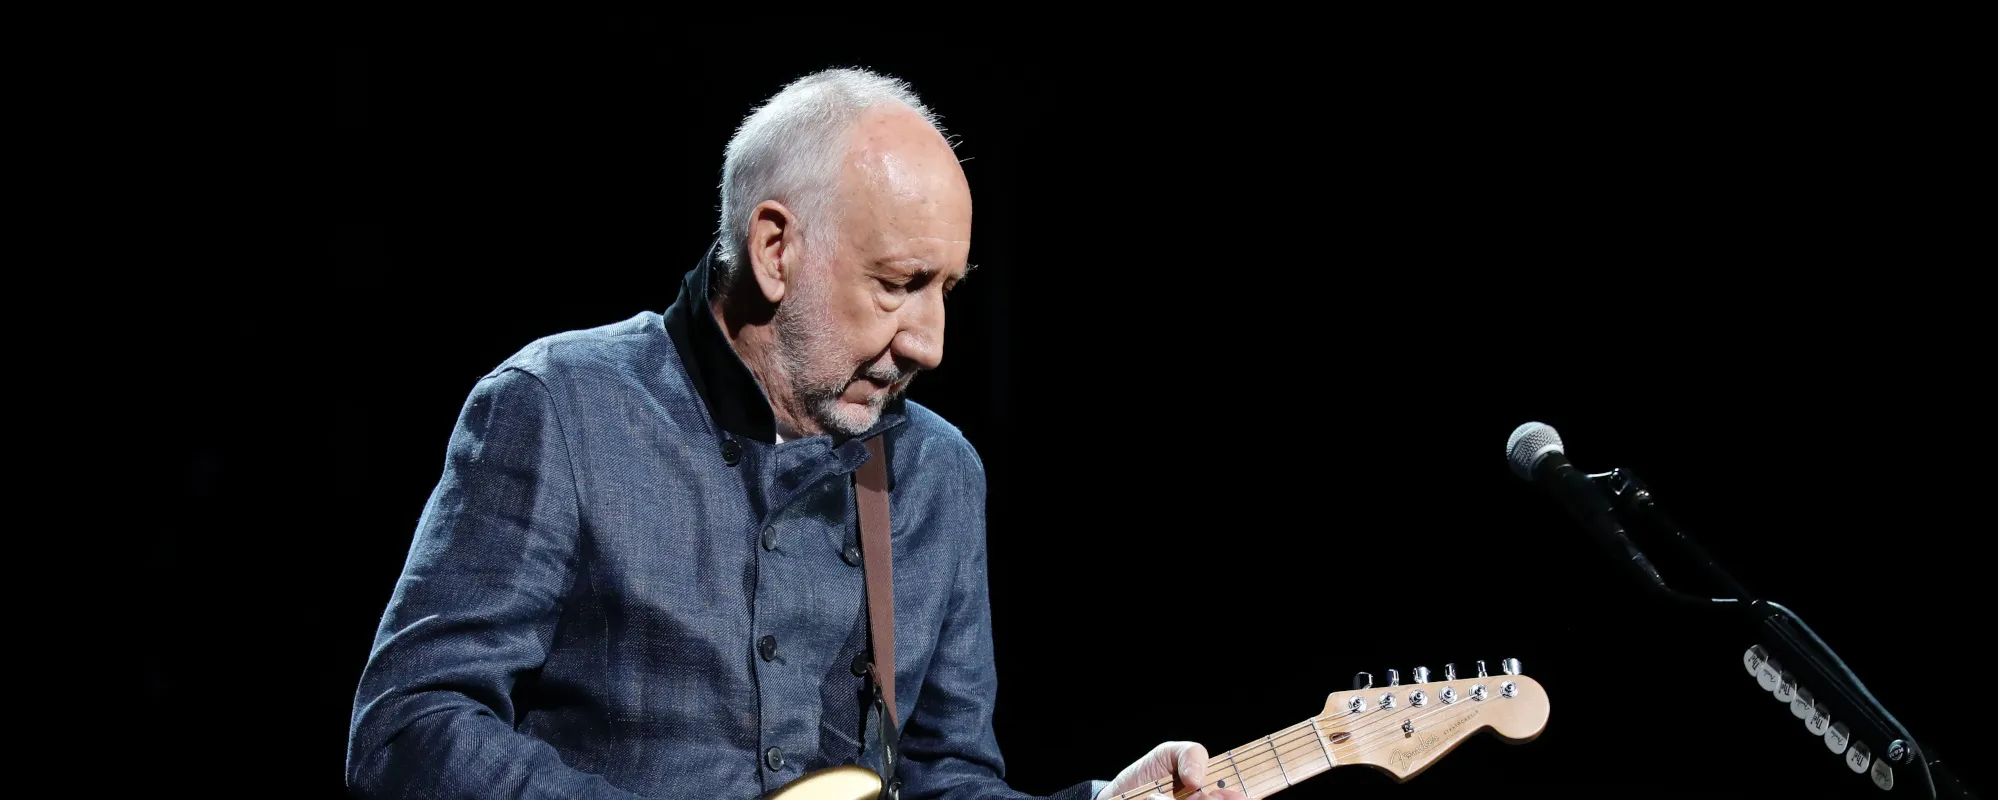 The Spiritual Meaning Behind Pete Townshend’s “Let My Love Open the Door”